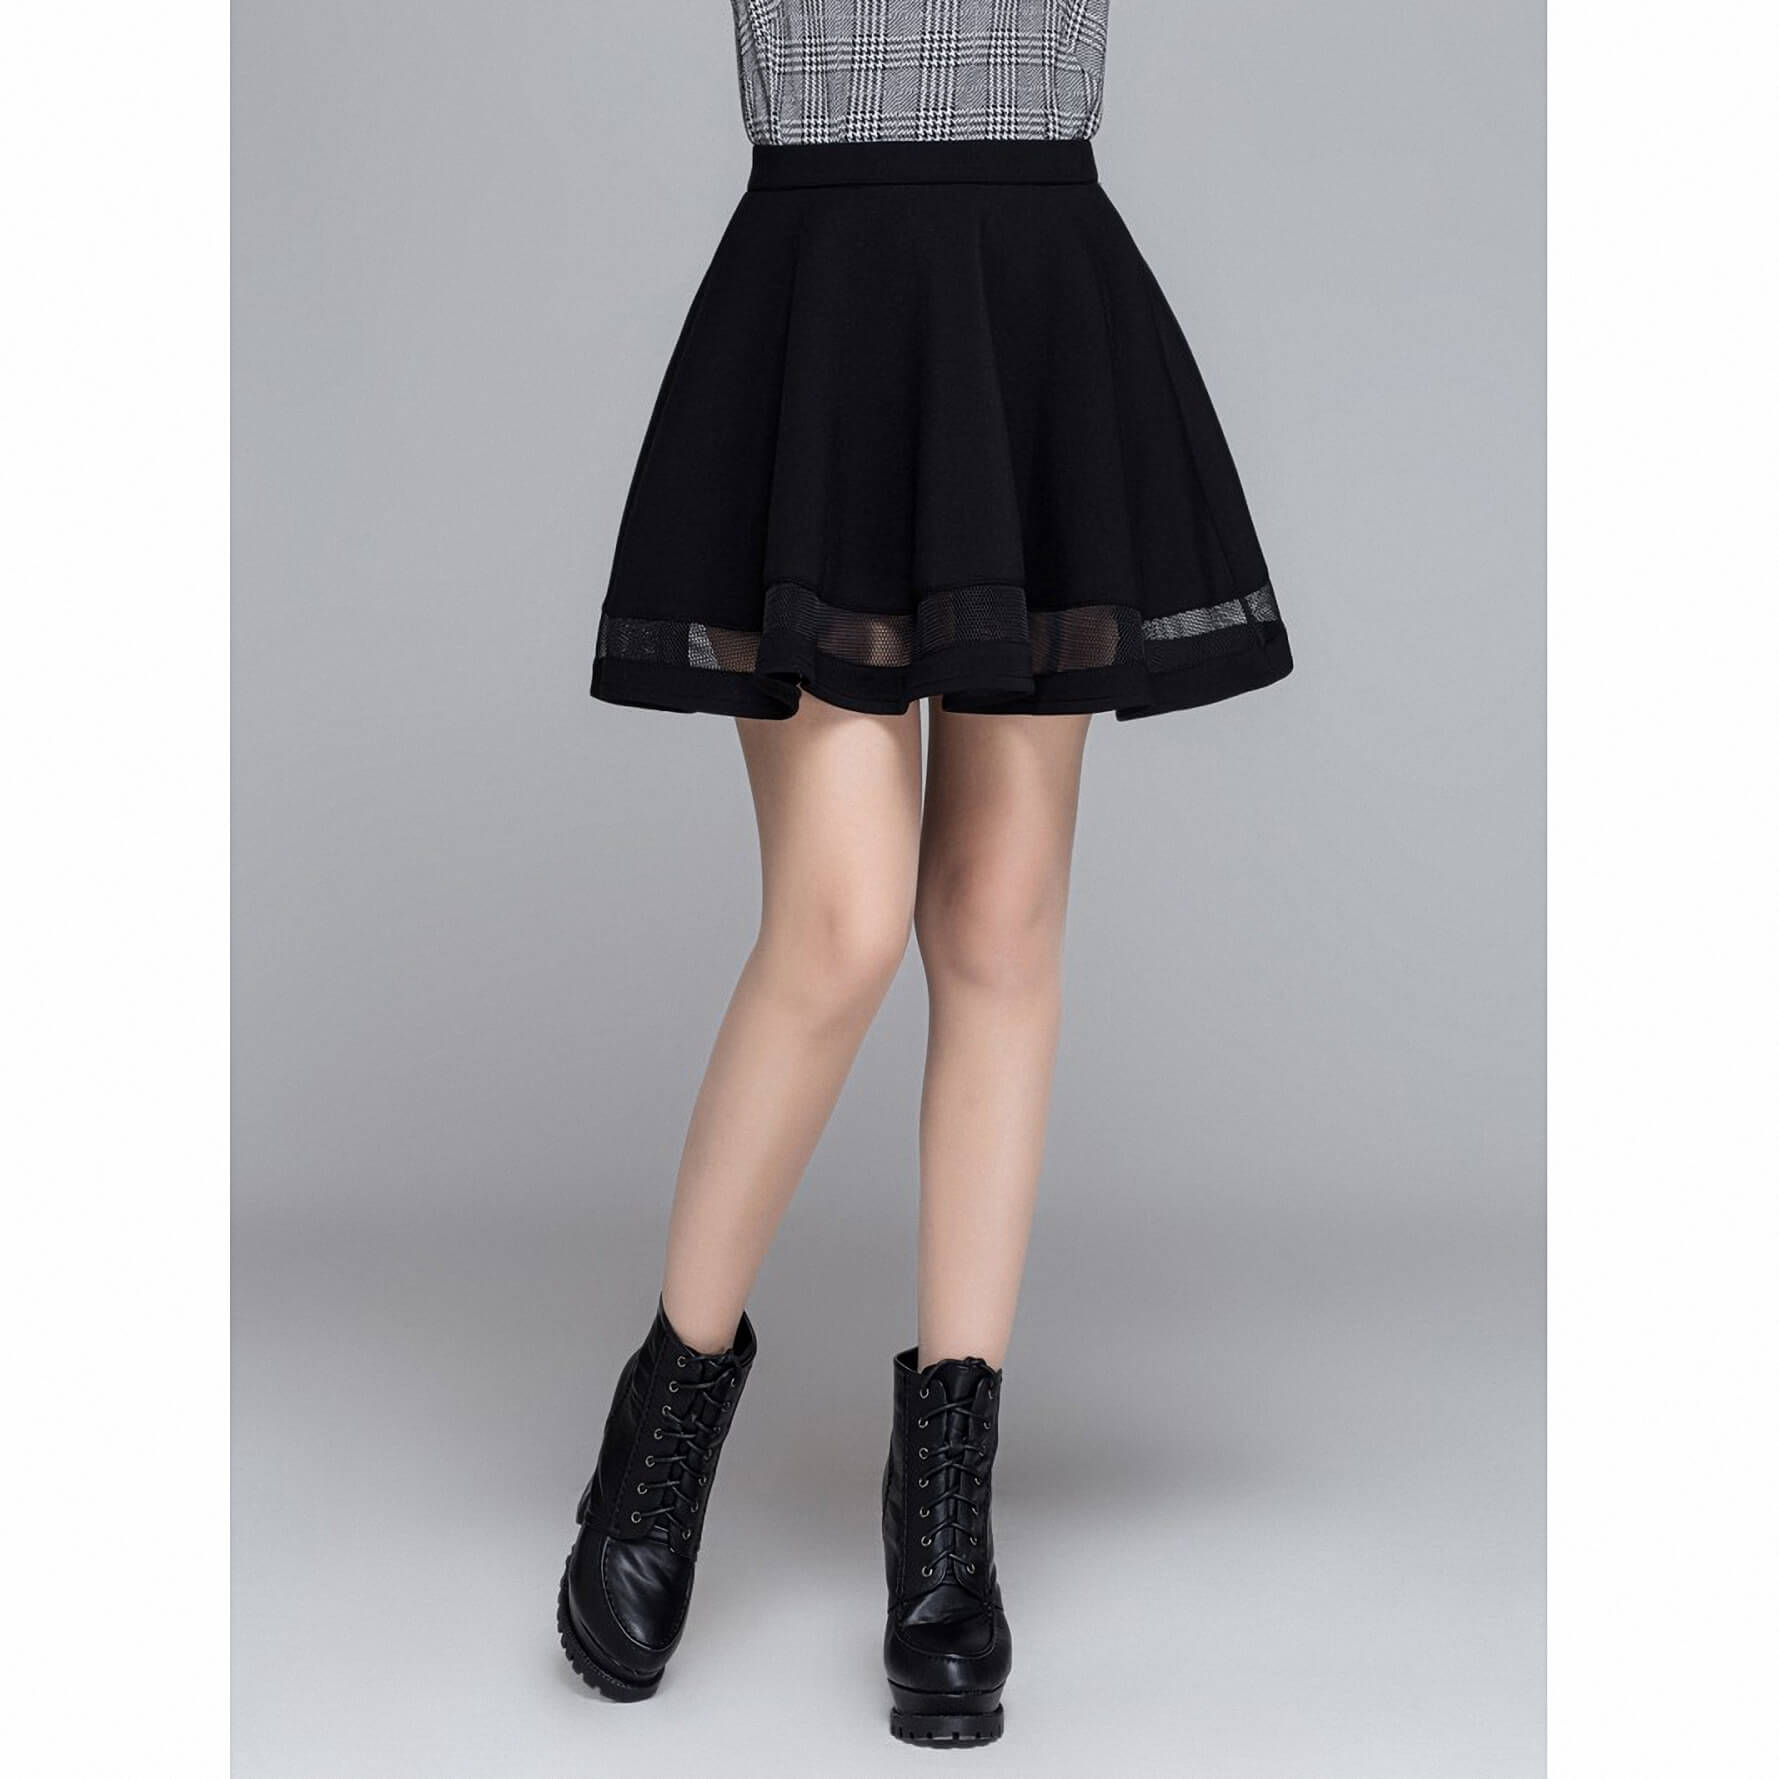 Pleated skirt for Rock Chick / Goth women skirts / Aesthetic Outfits - HARD'N'HEAVY